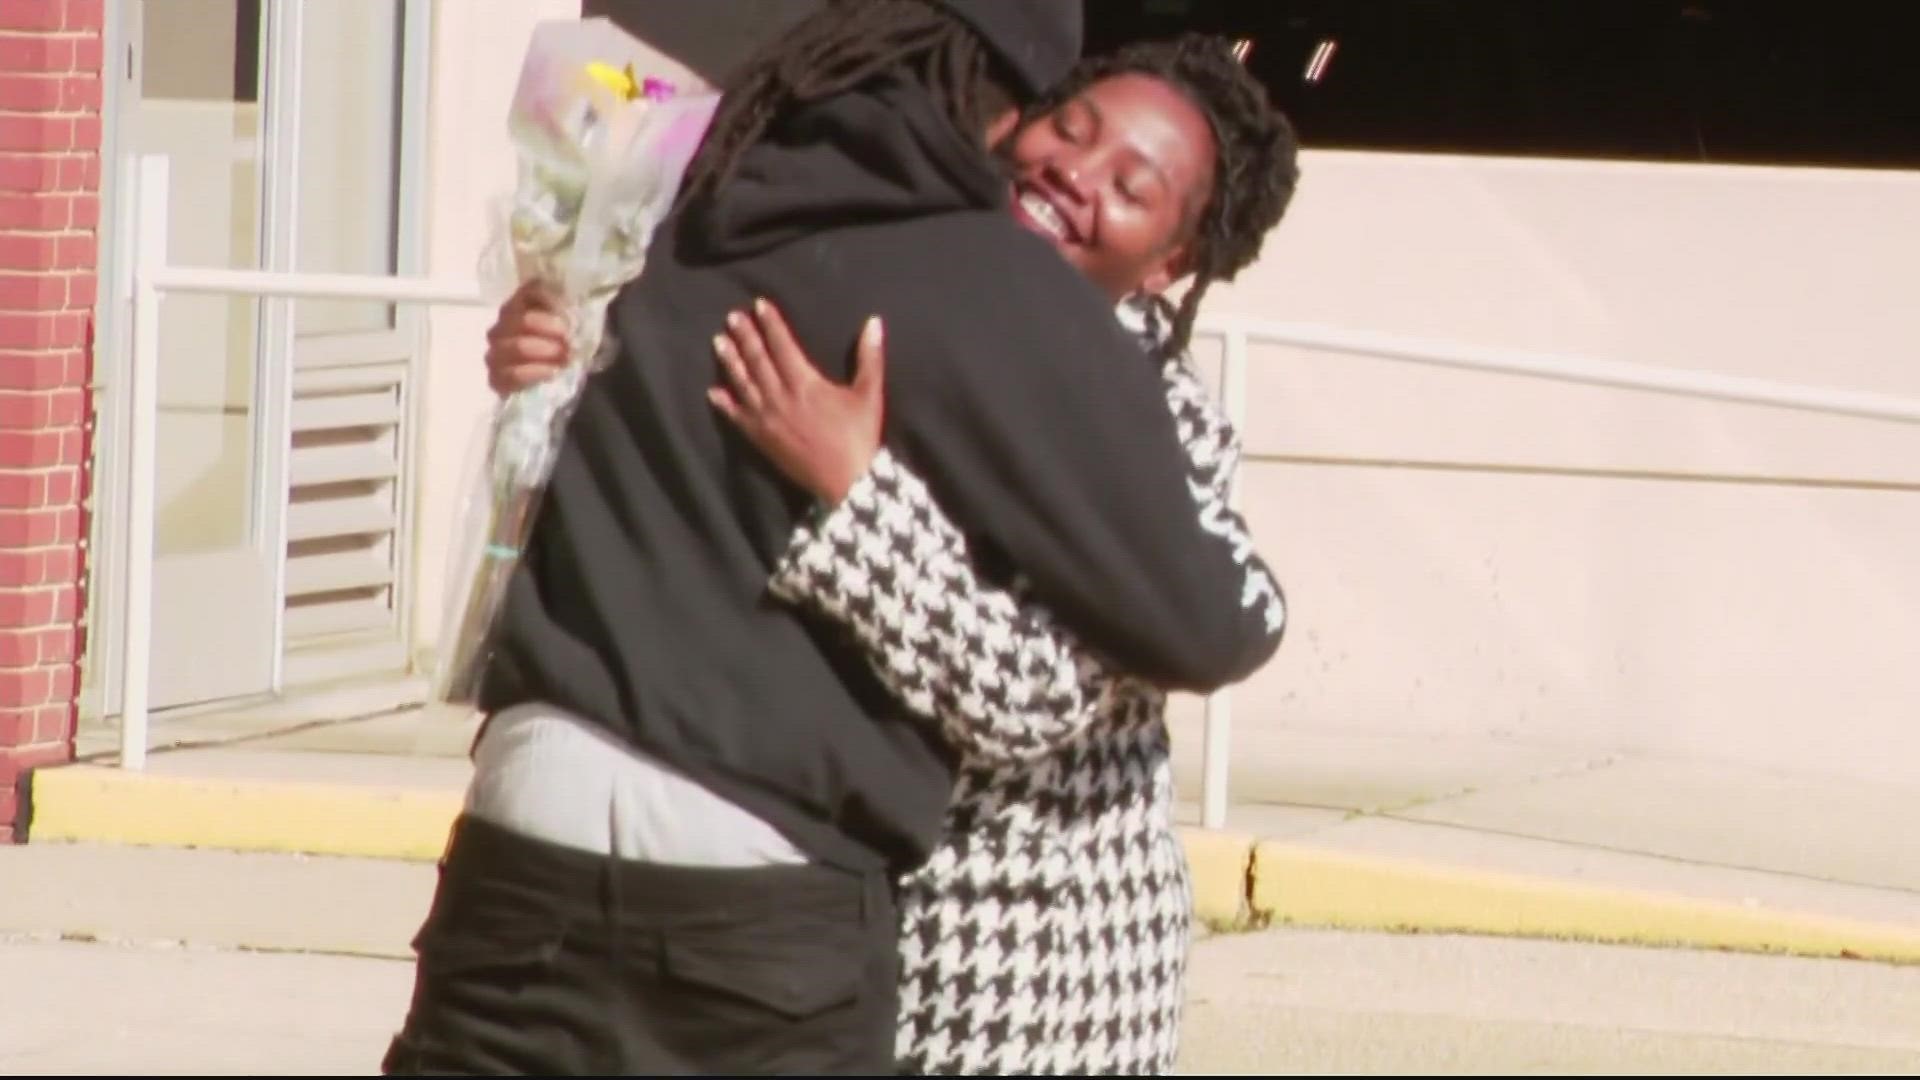 Stories of compassion have emerged following a deadly shooting at a D.C. Metro stop.